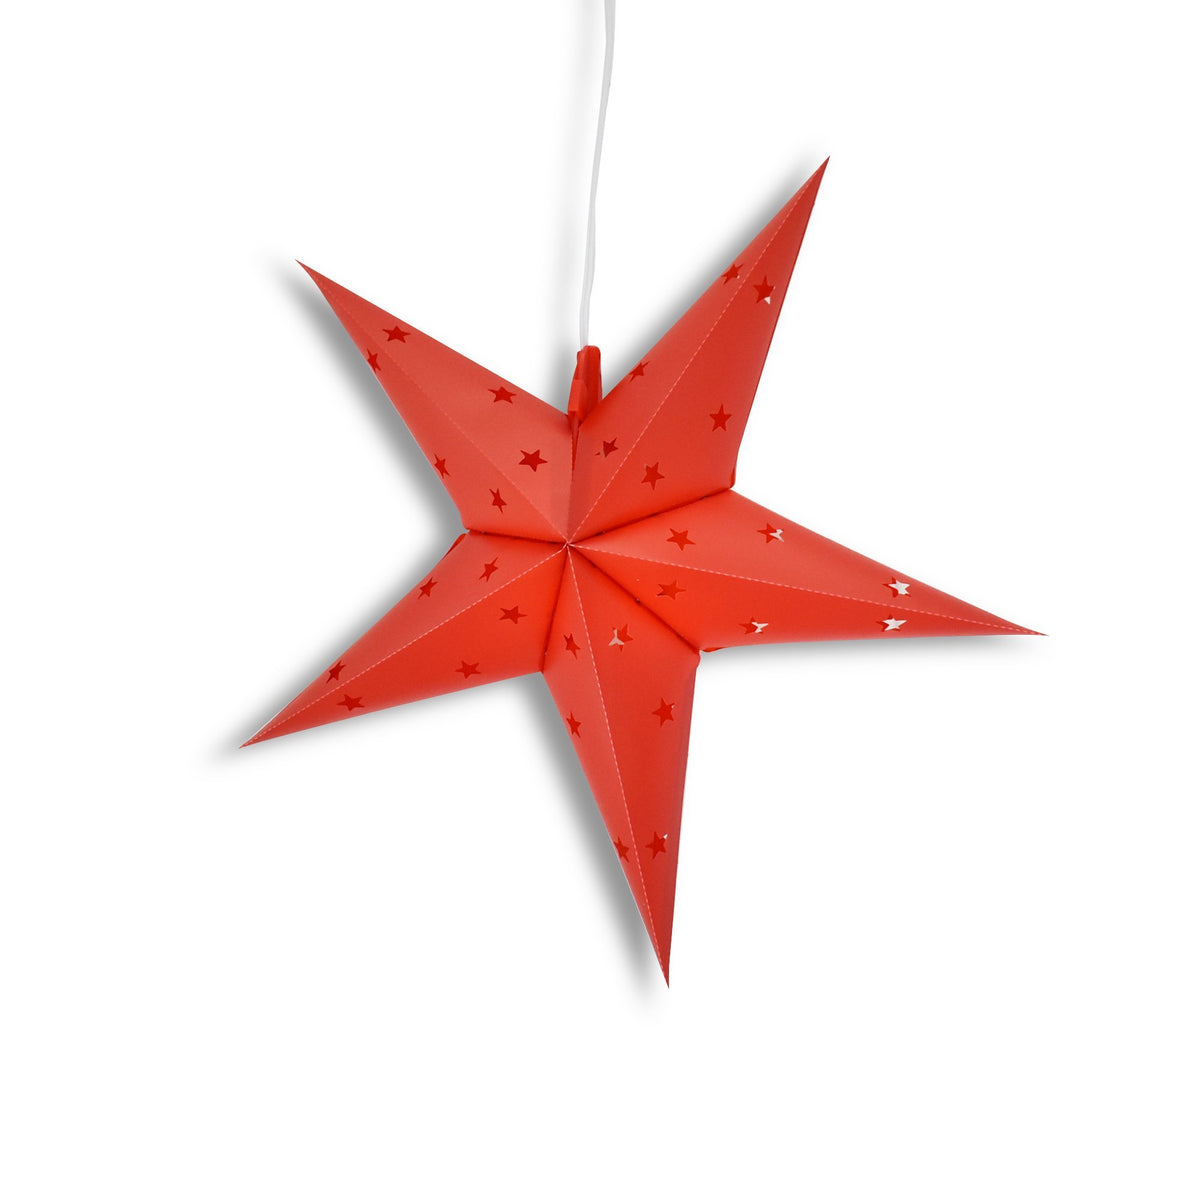 19&quot; Red Weatherproof Star Lantern Lamp, Hanging Decoration (Shade Only)